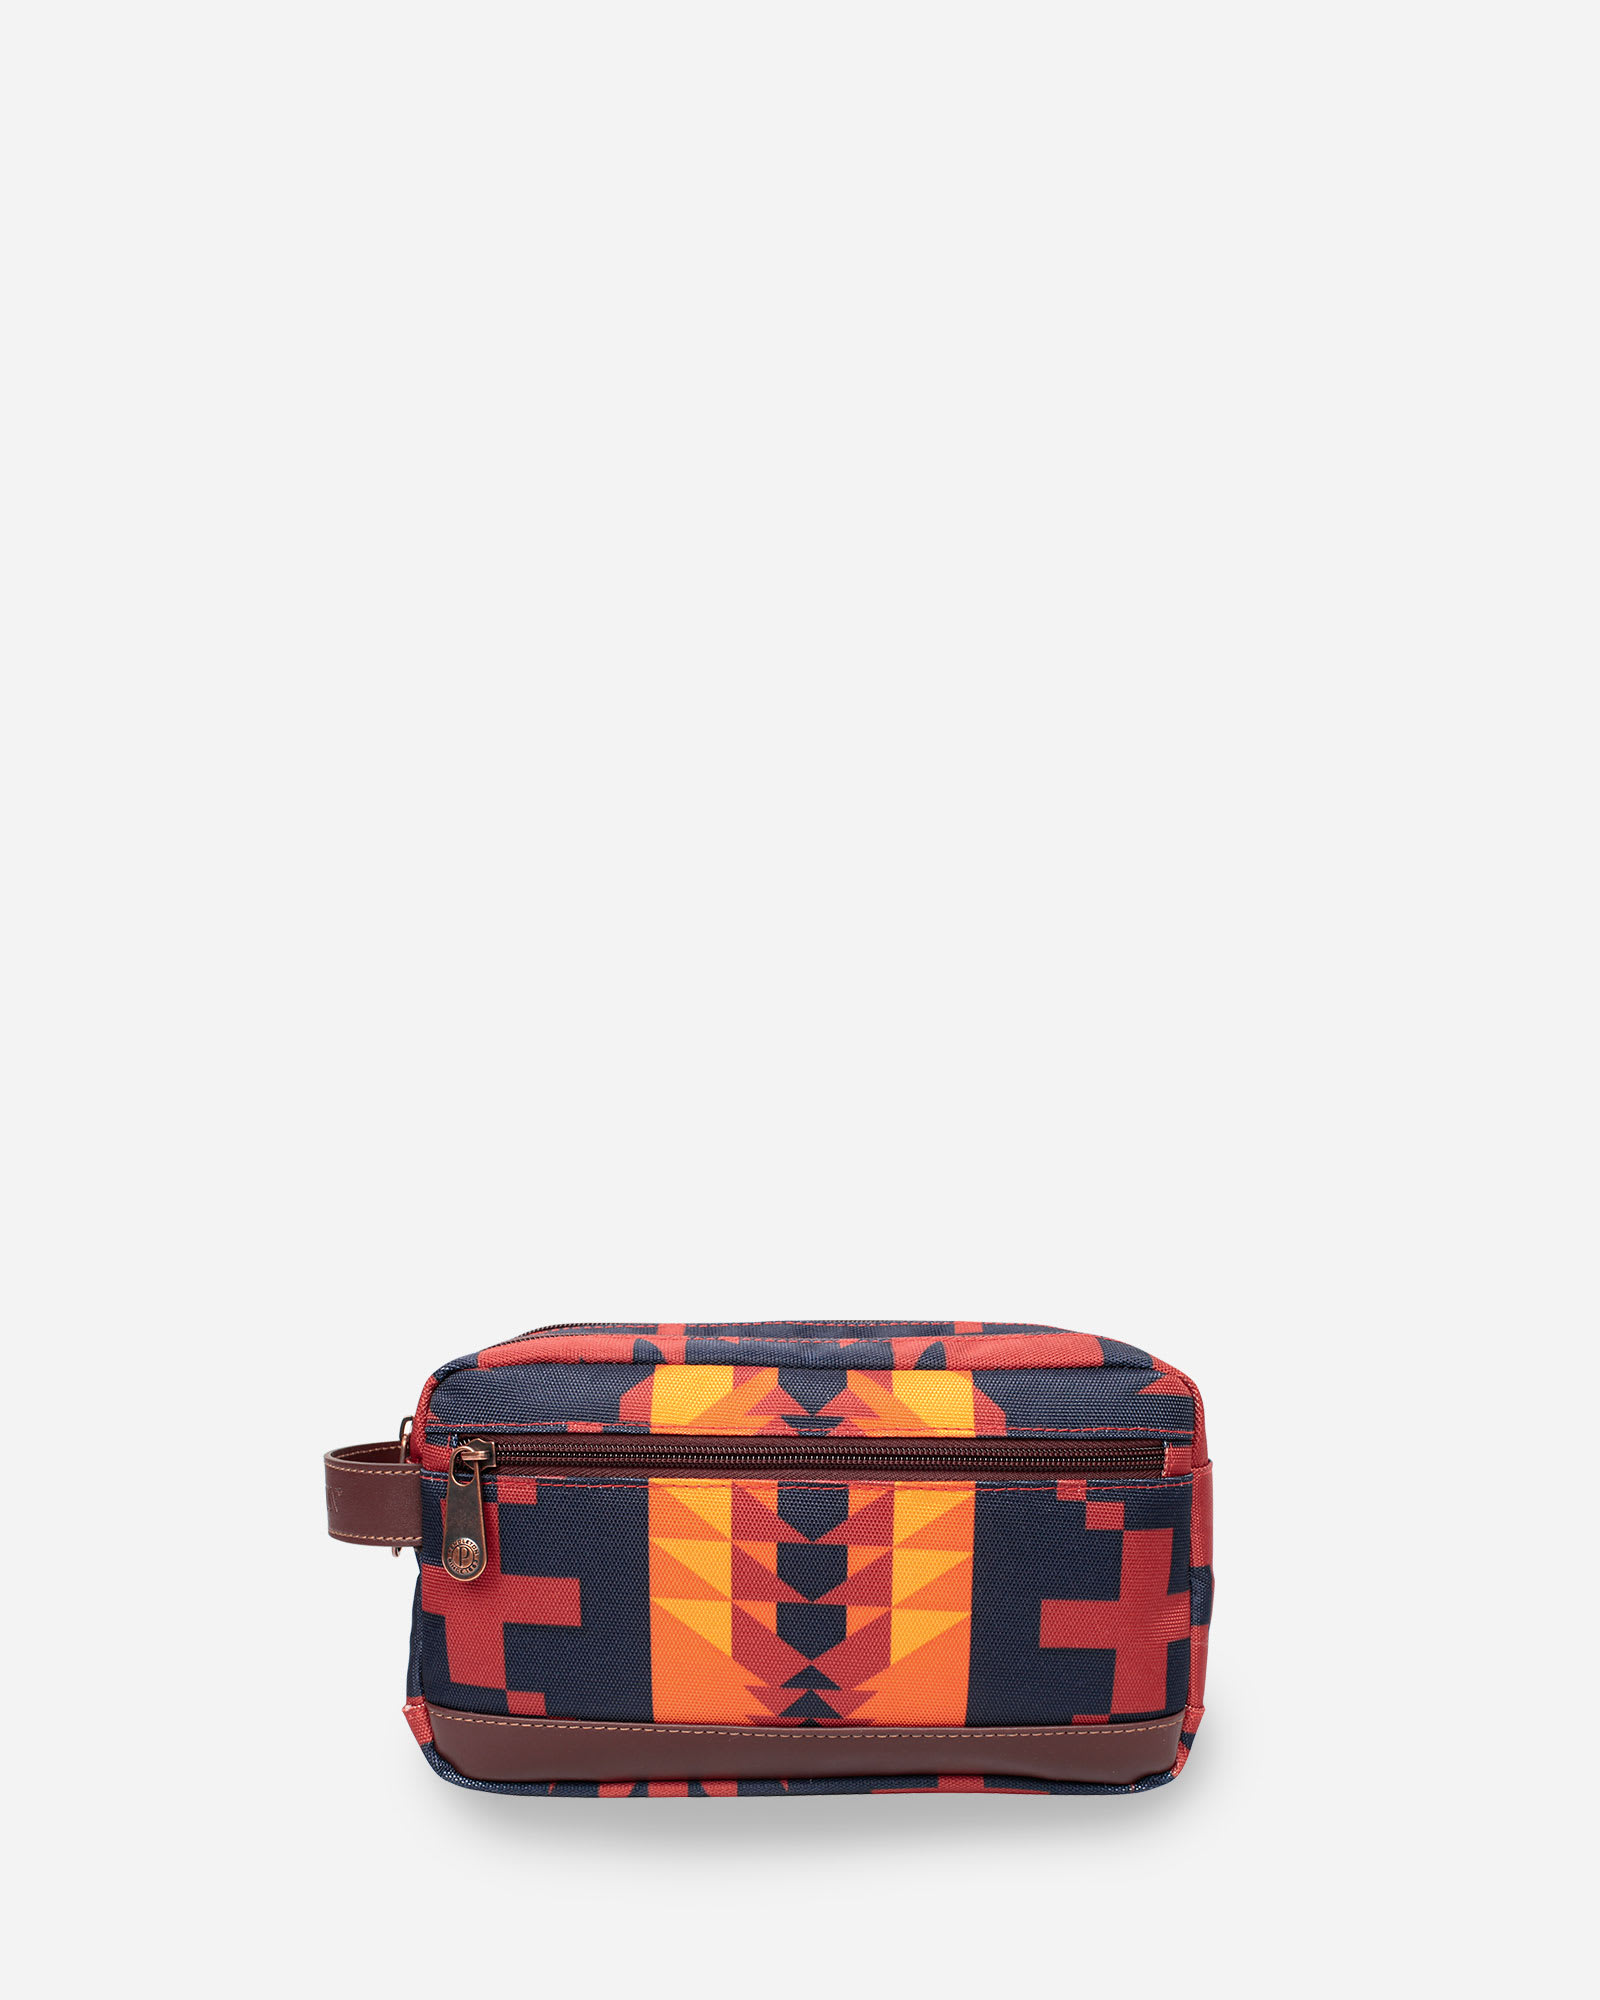 SPIDER ROCK TOILETRY BAG